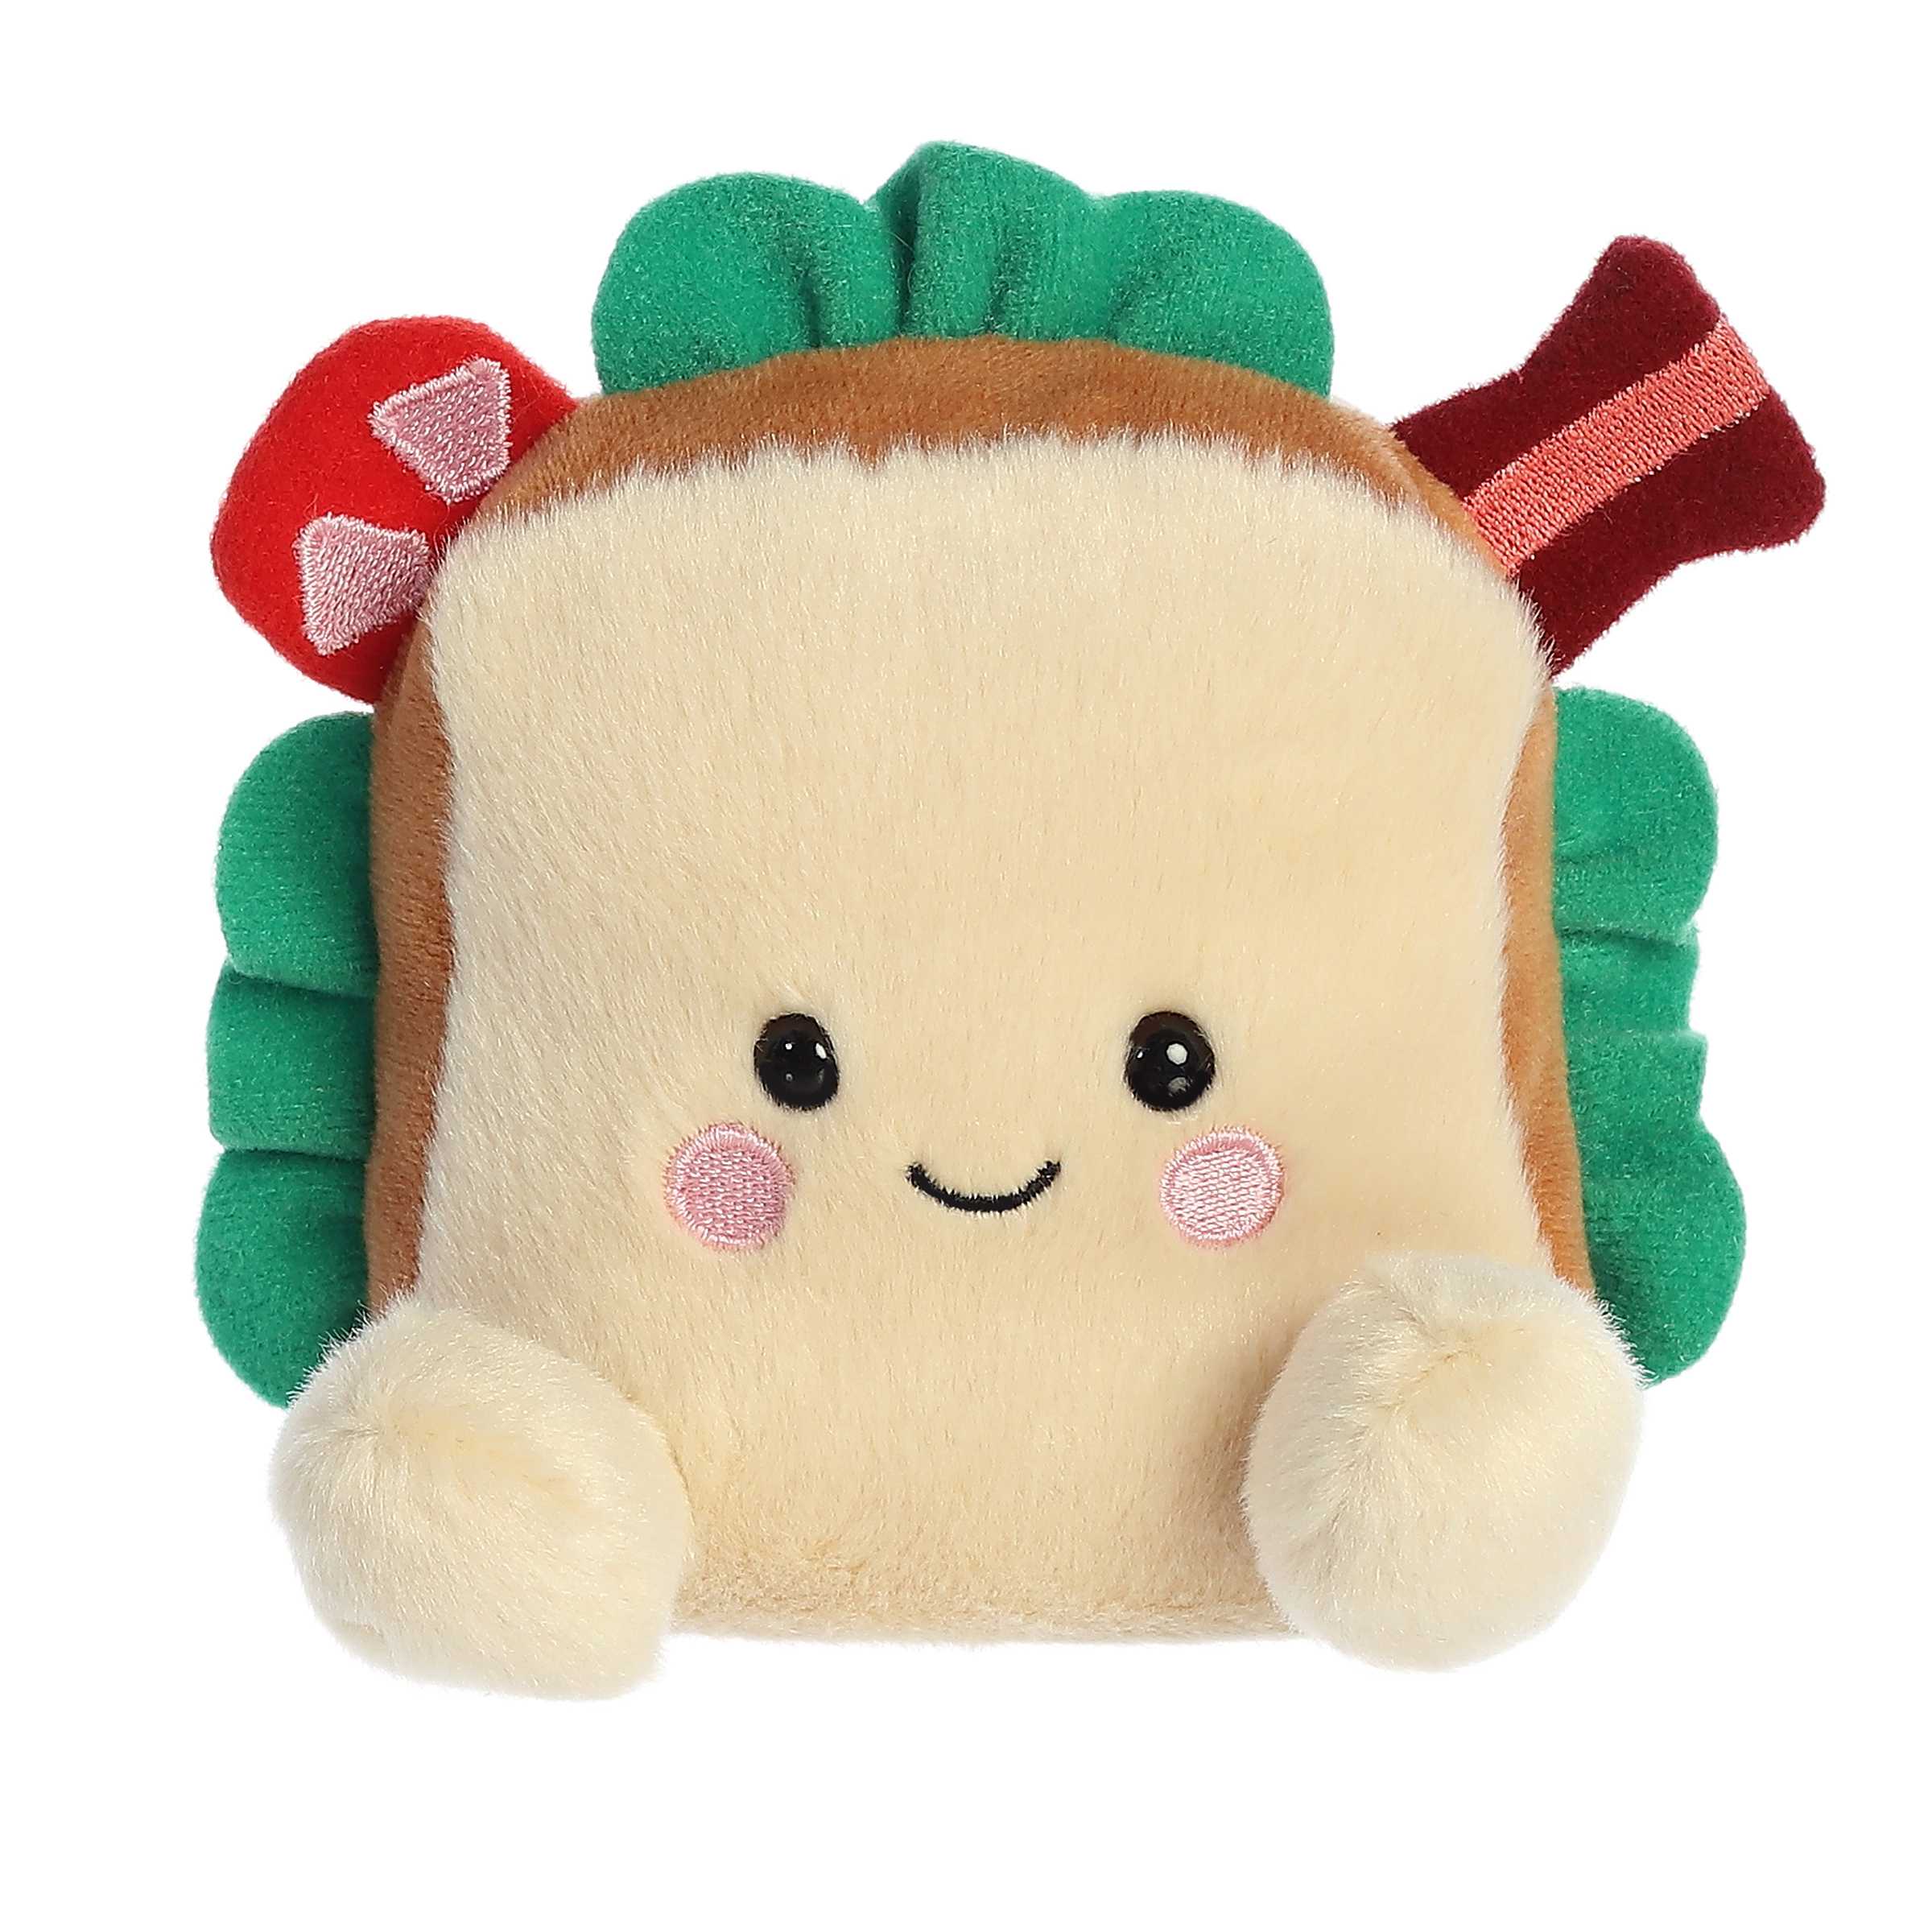 A yum-looking plush resembling a BLT sandwich on tan bread with green lettuce, red tomato, and crispy brown bacon peeking out